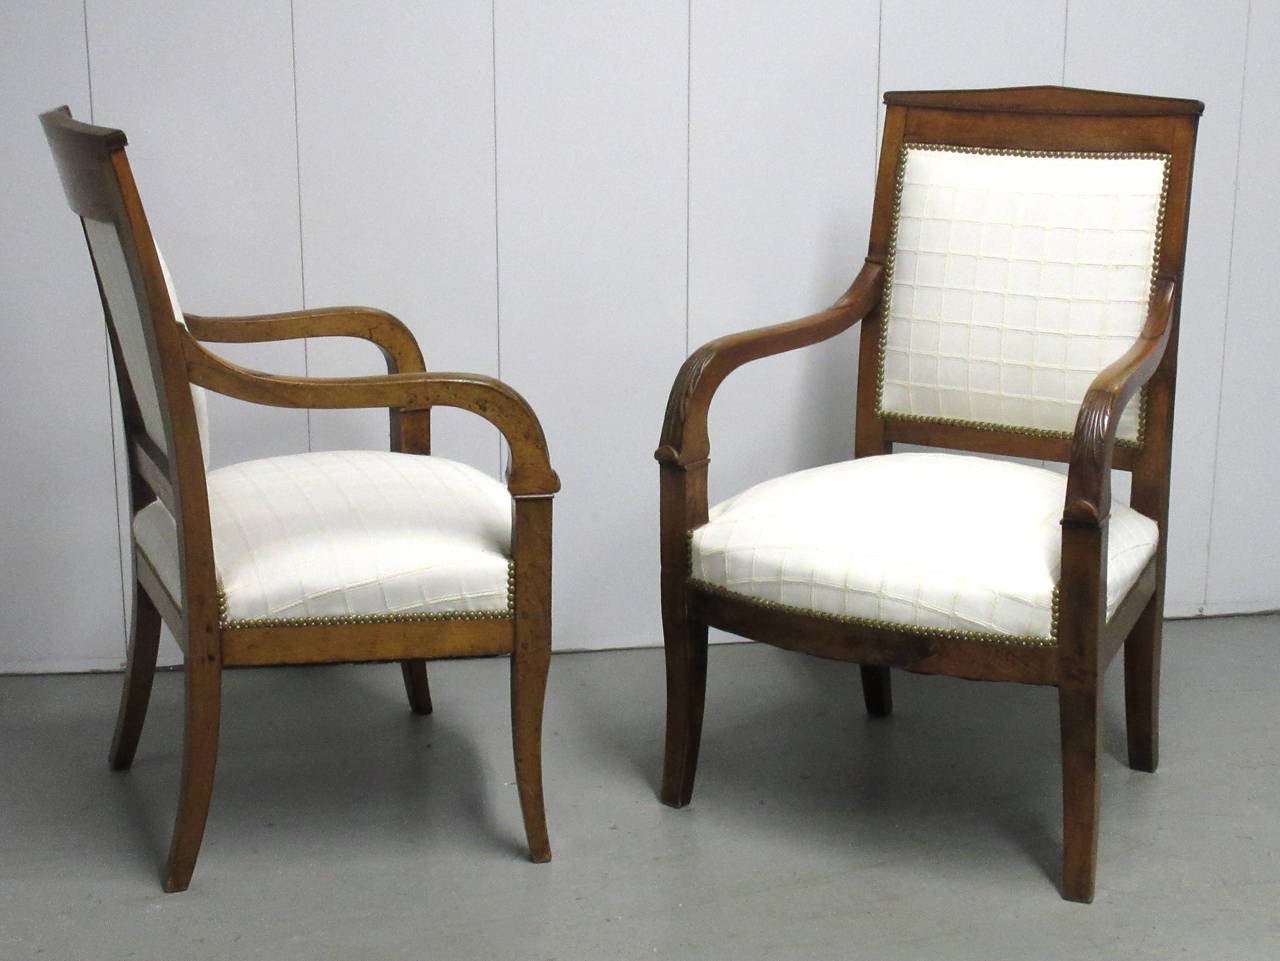 A pair of French Empire period upholstered armchairs with saber legs and foliate carved armrests.
Upholstery is new and embellished with brass nailheads throughout.